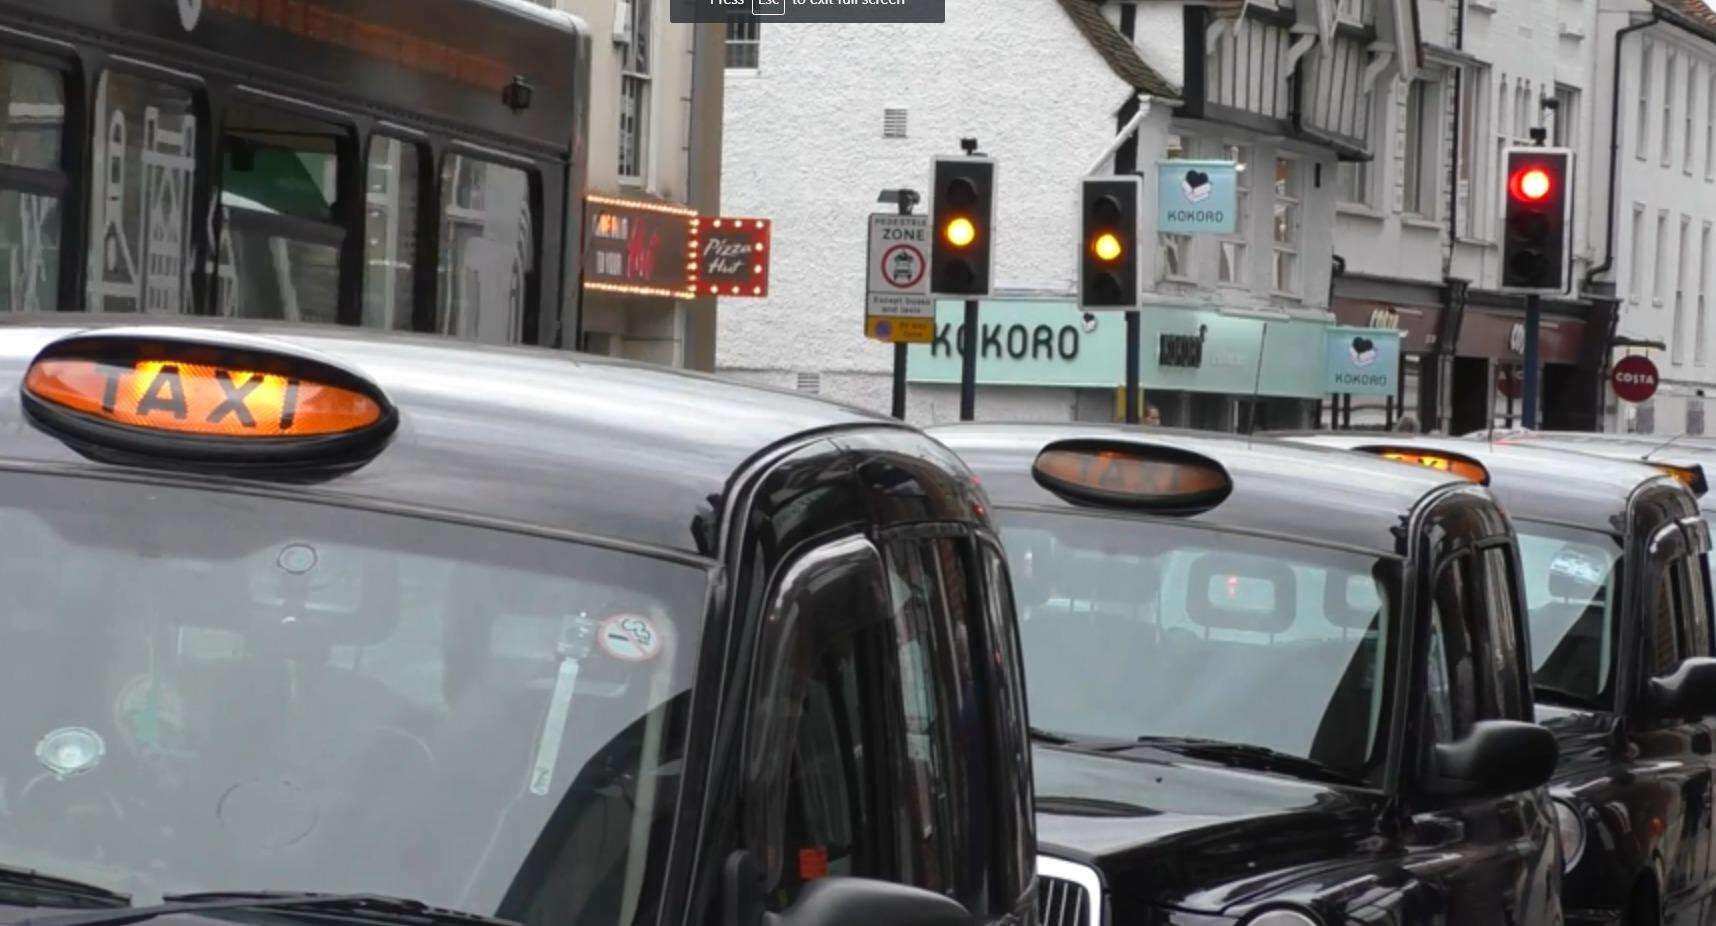 Taxi drivers say the could be forced off the road by new rules being introduced by Maidstone council